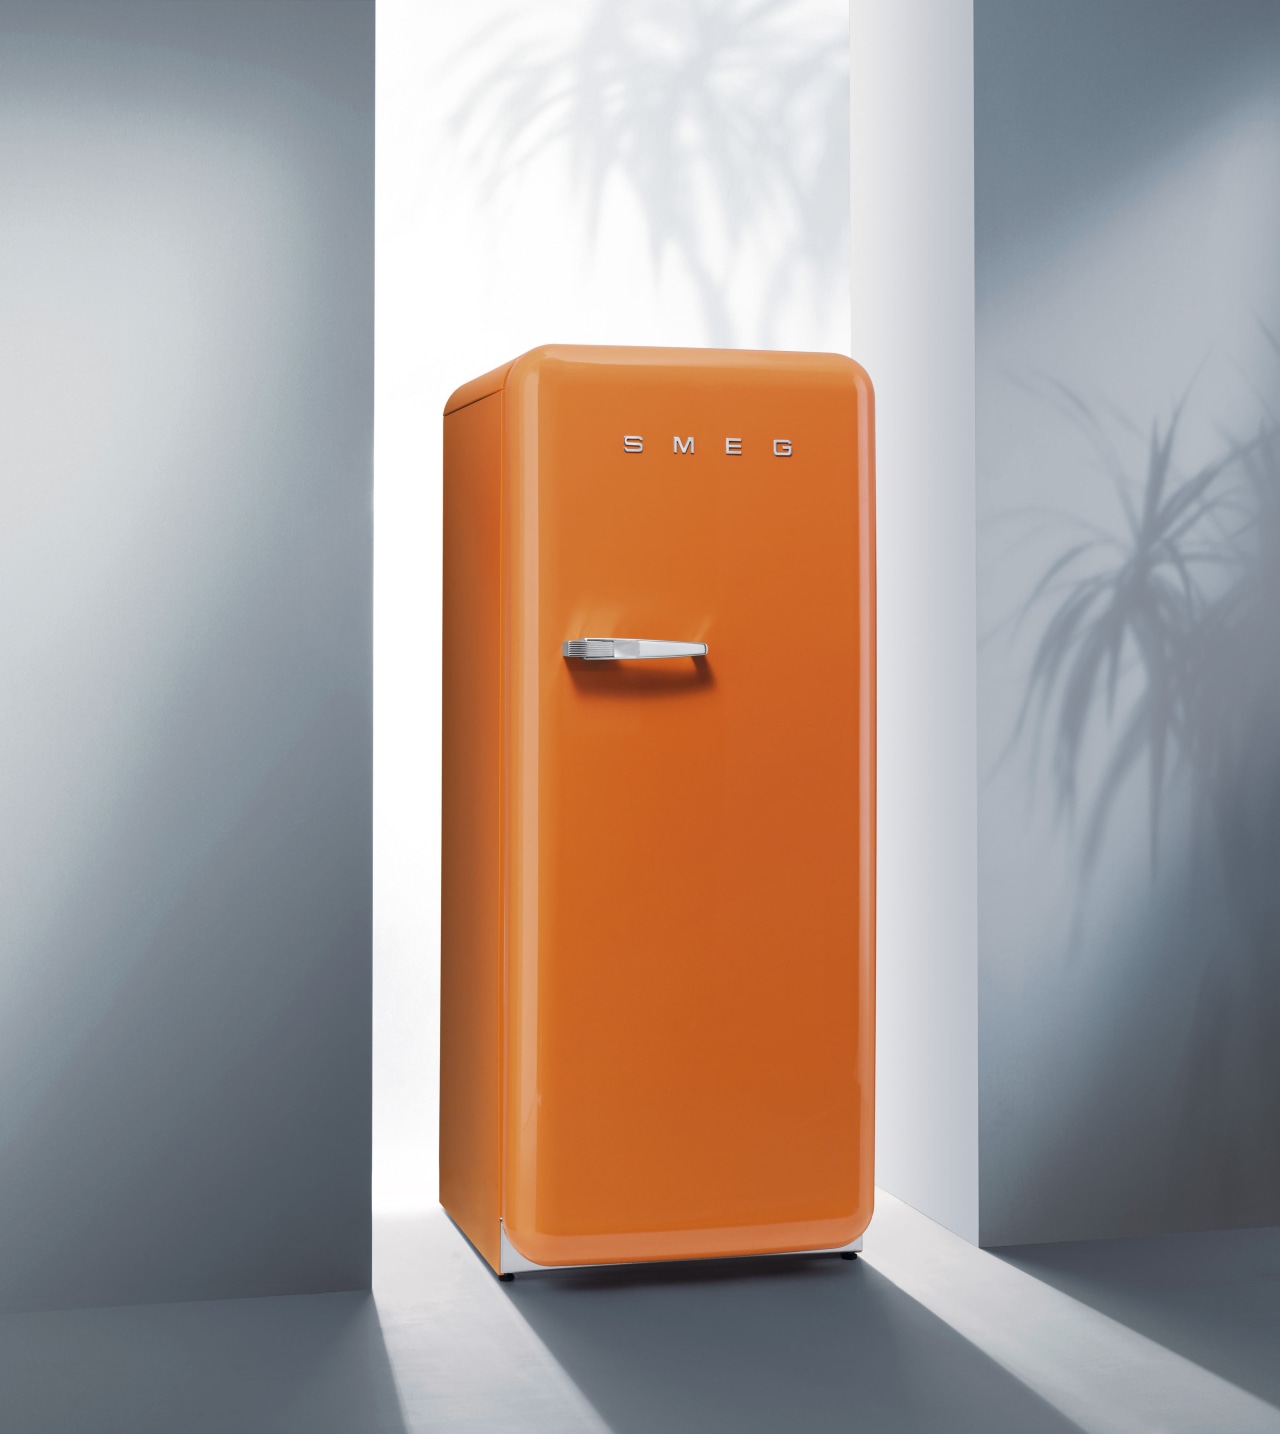 View of classic Smeg refrigerator. home appliance, kitchen appliance, major appliance, orange, product, product design, refrigerator, gray